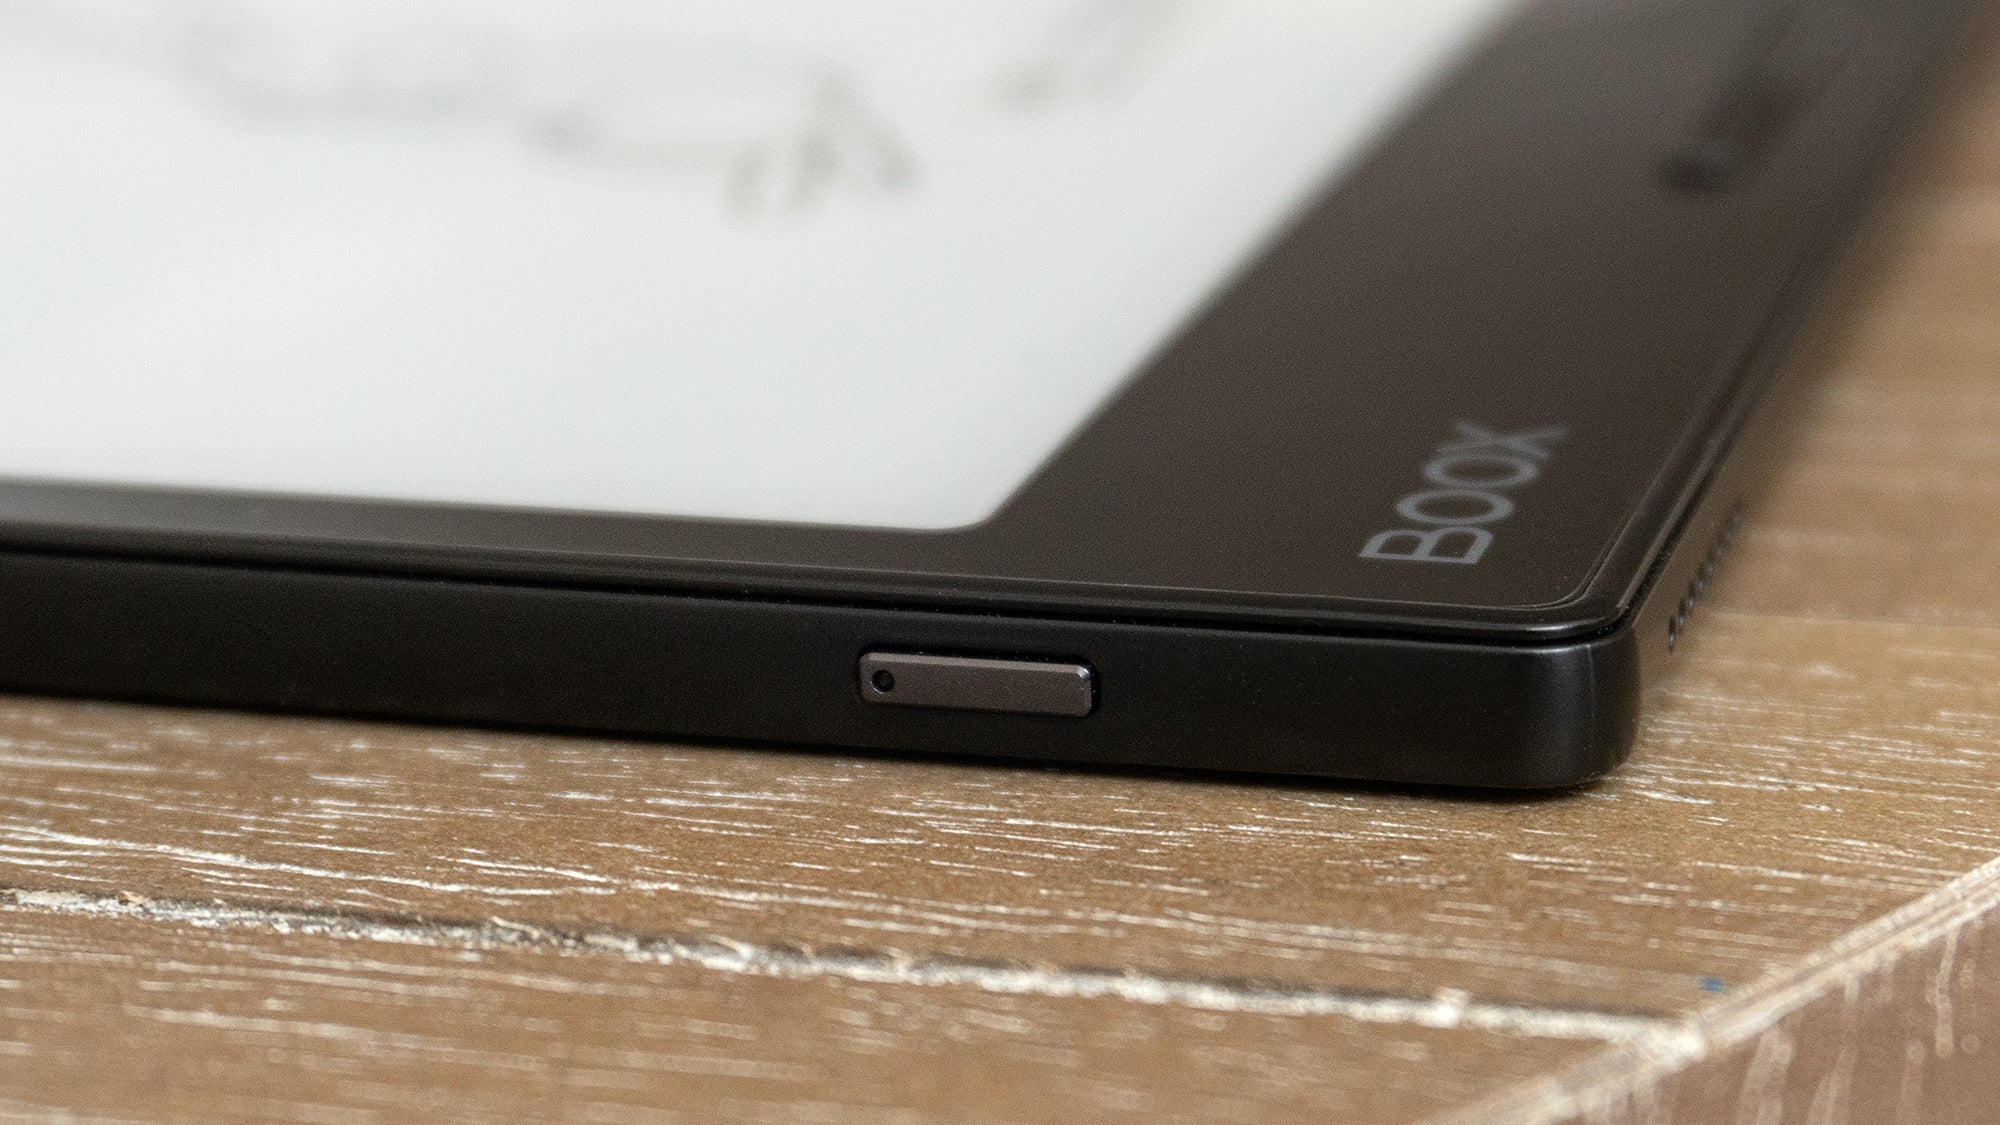 There's only one other button on the Onyx Leaf 2, a sleep/power button on its top edge. (Photo: Andrew Liszewski | Gizmodo)